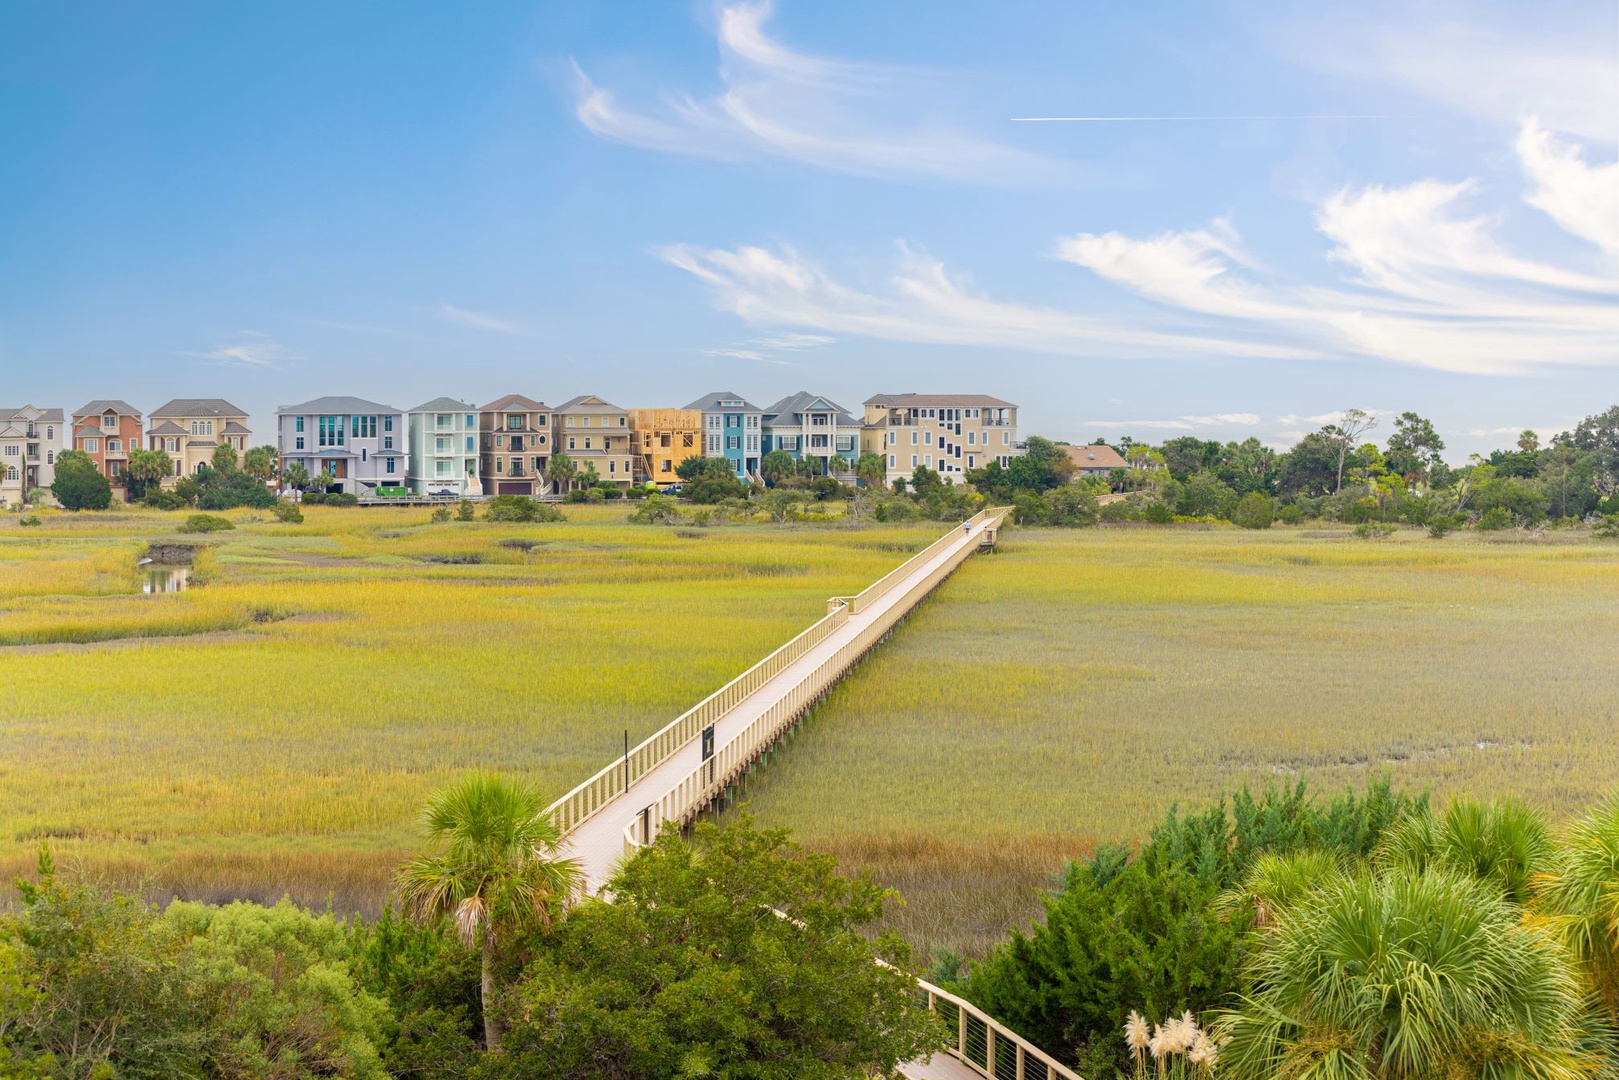 Enjoy being a mere .4 mile walk away from the beach during your stay!